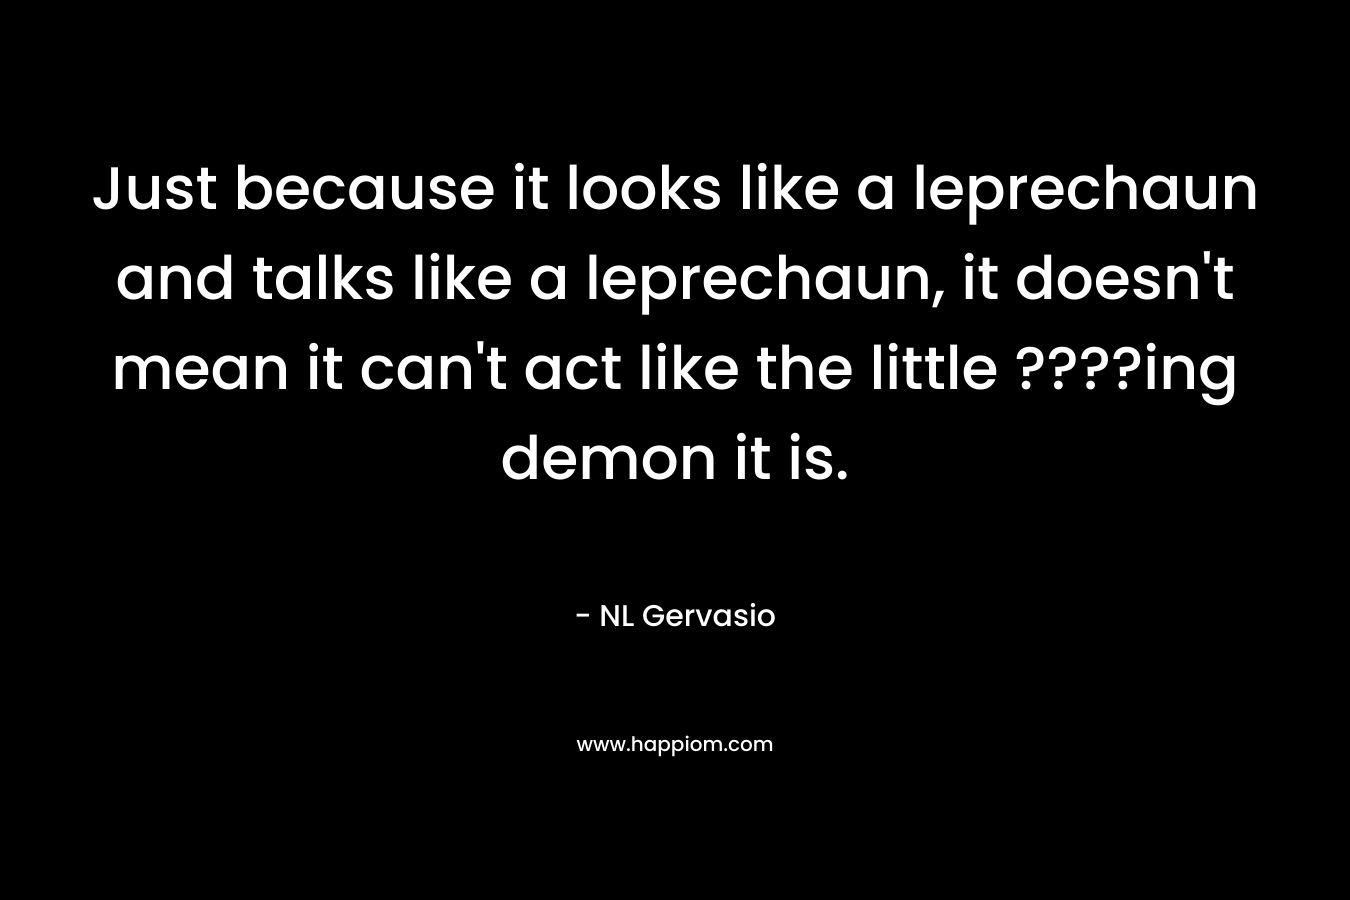 Just because it looks like a leprechaun and talks like a leprechaun, it doesn’t mean it can’t act like the little ????ing demon it is. – NL Gervasio